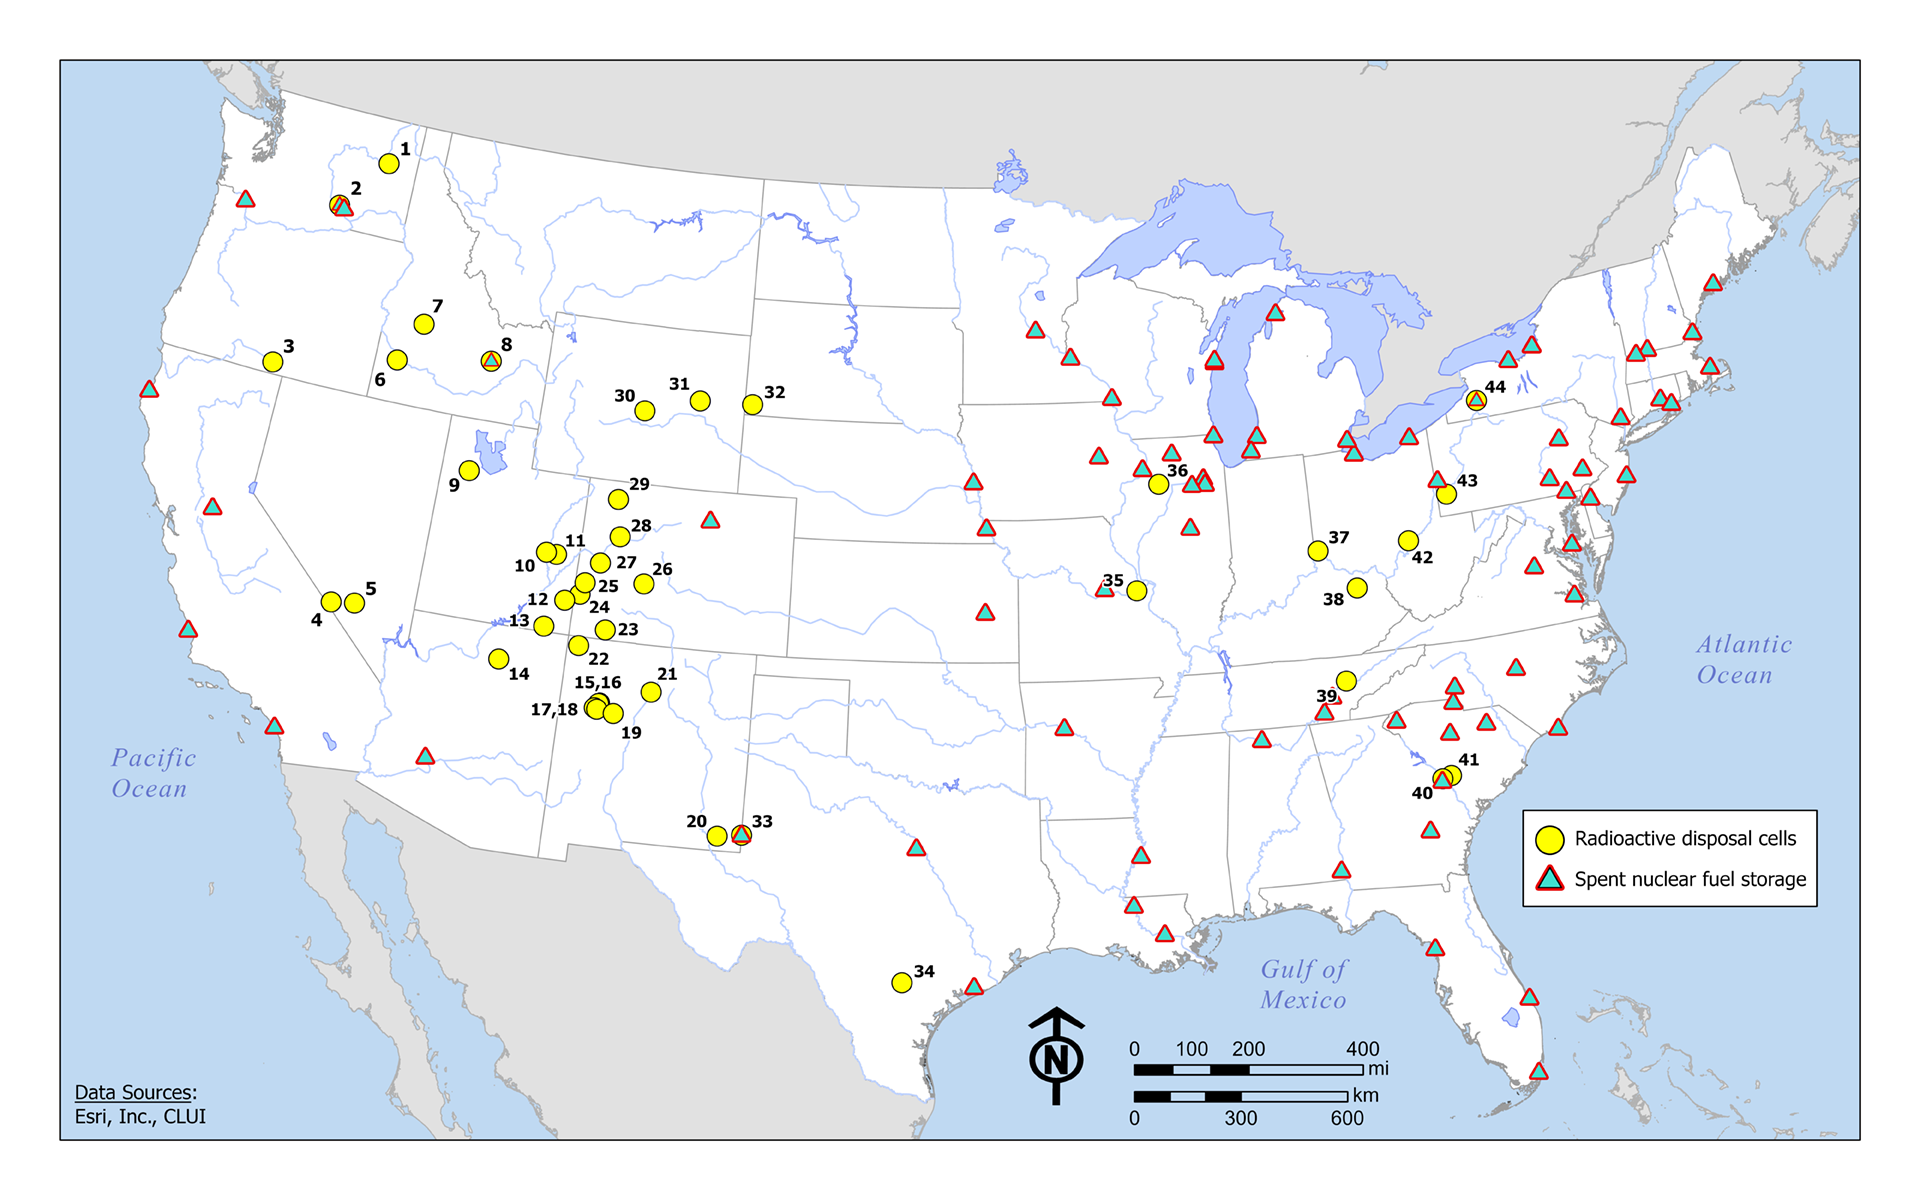 Outline map showing locations of radioactive waste disposal cells and spent nuclear fuel storage in the continental United States